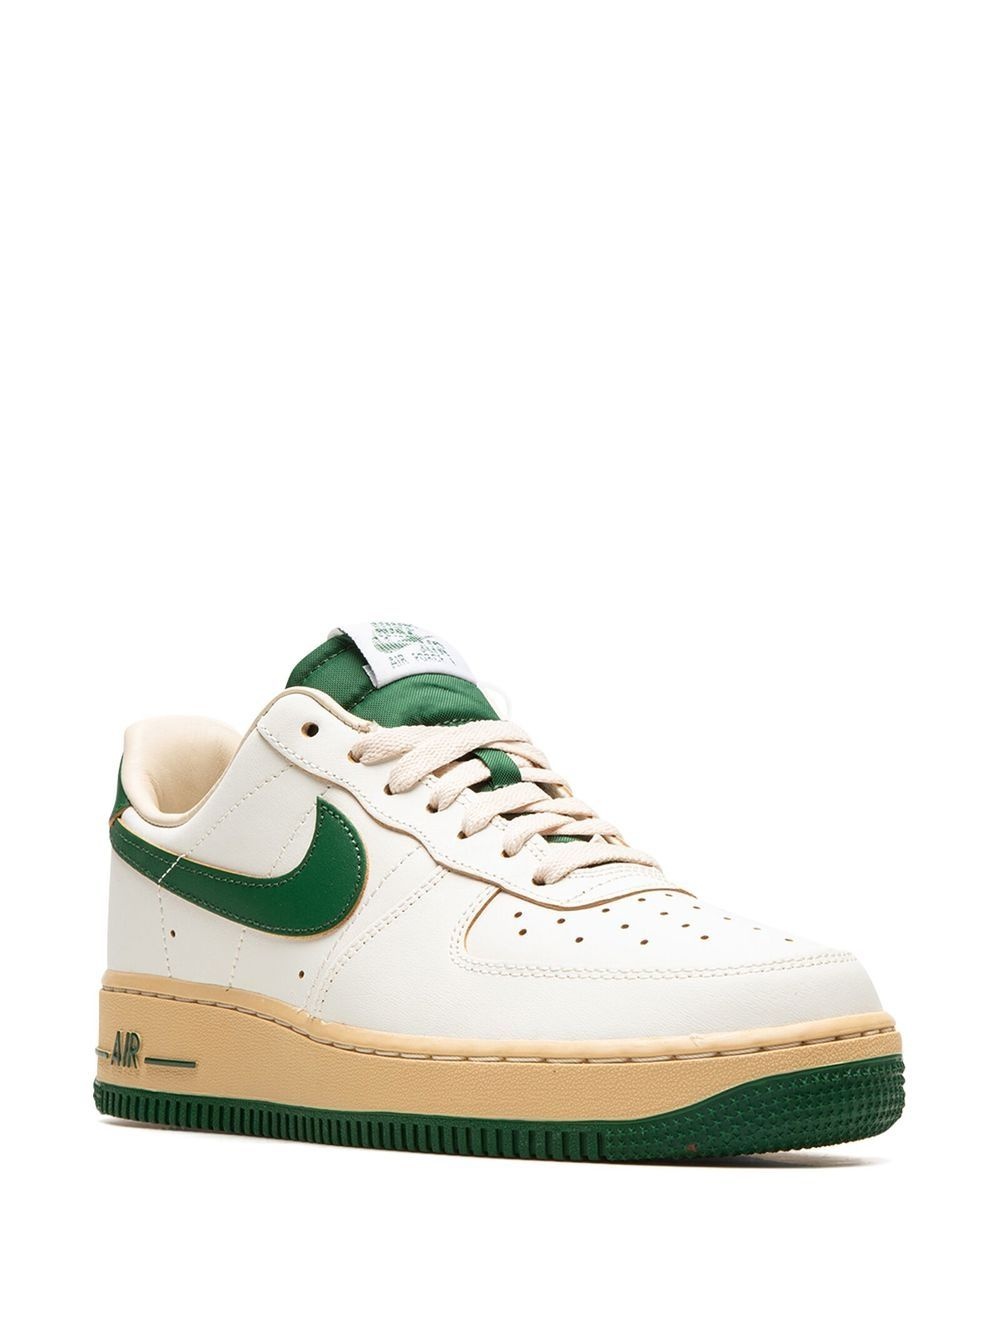 Air Force 1 Low "Gorge Green" sneakers - 2